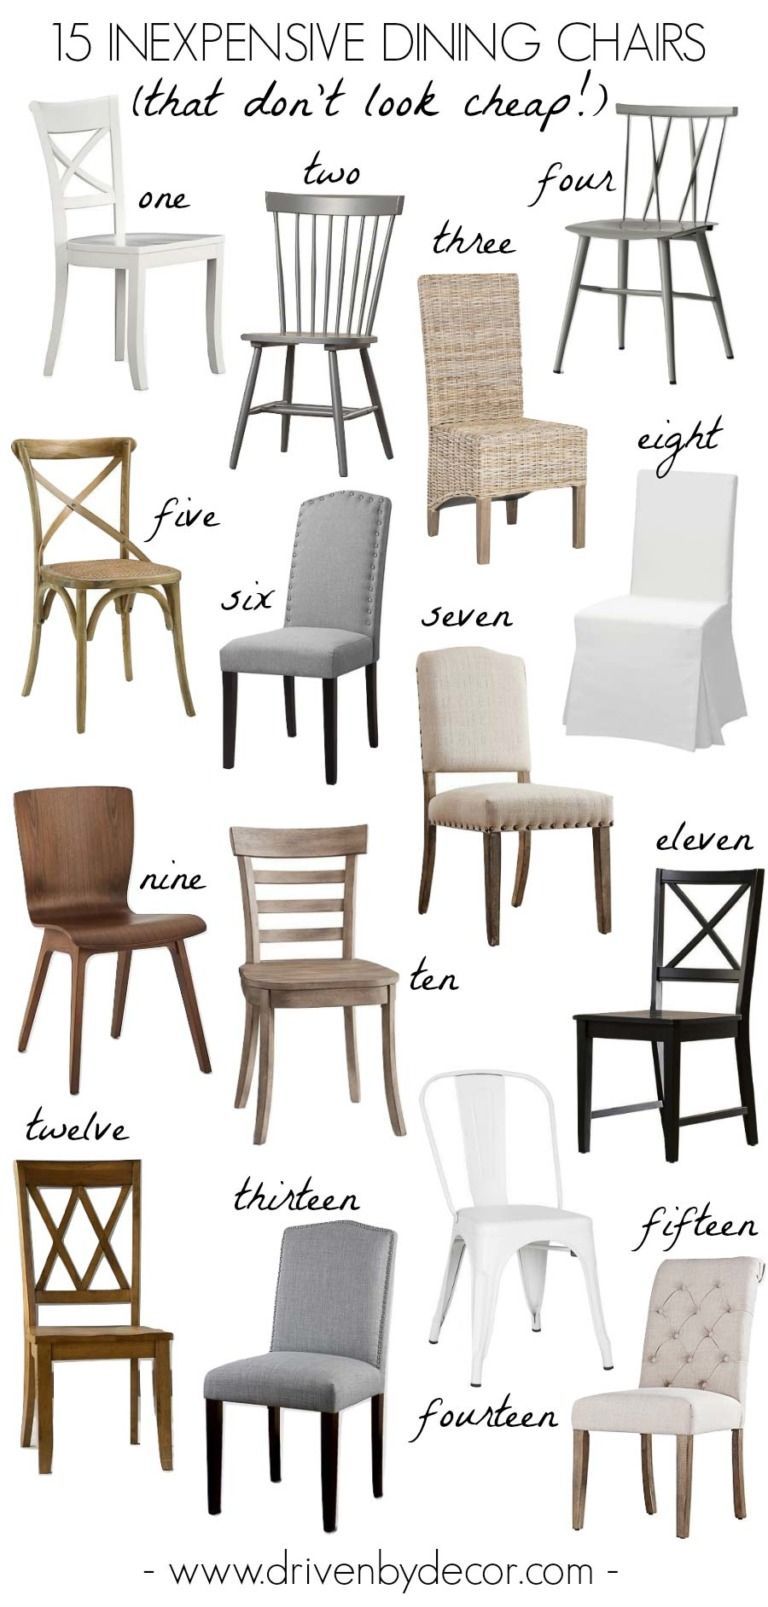 15 Inexpensive Dining Chairs (That Don’t Look Cheap!) - pickndecor.com/design